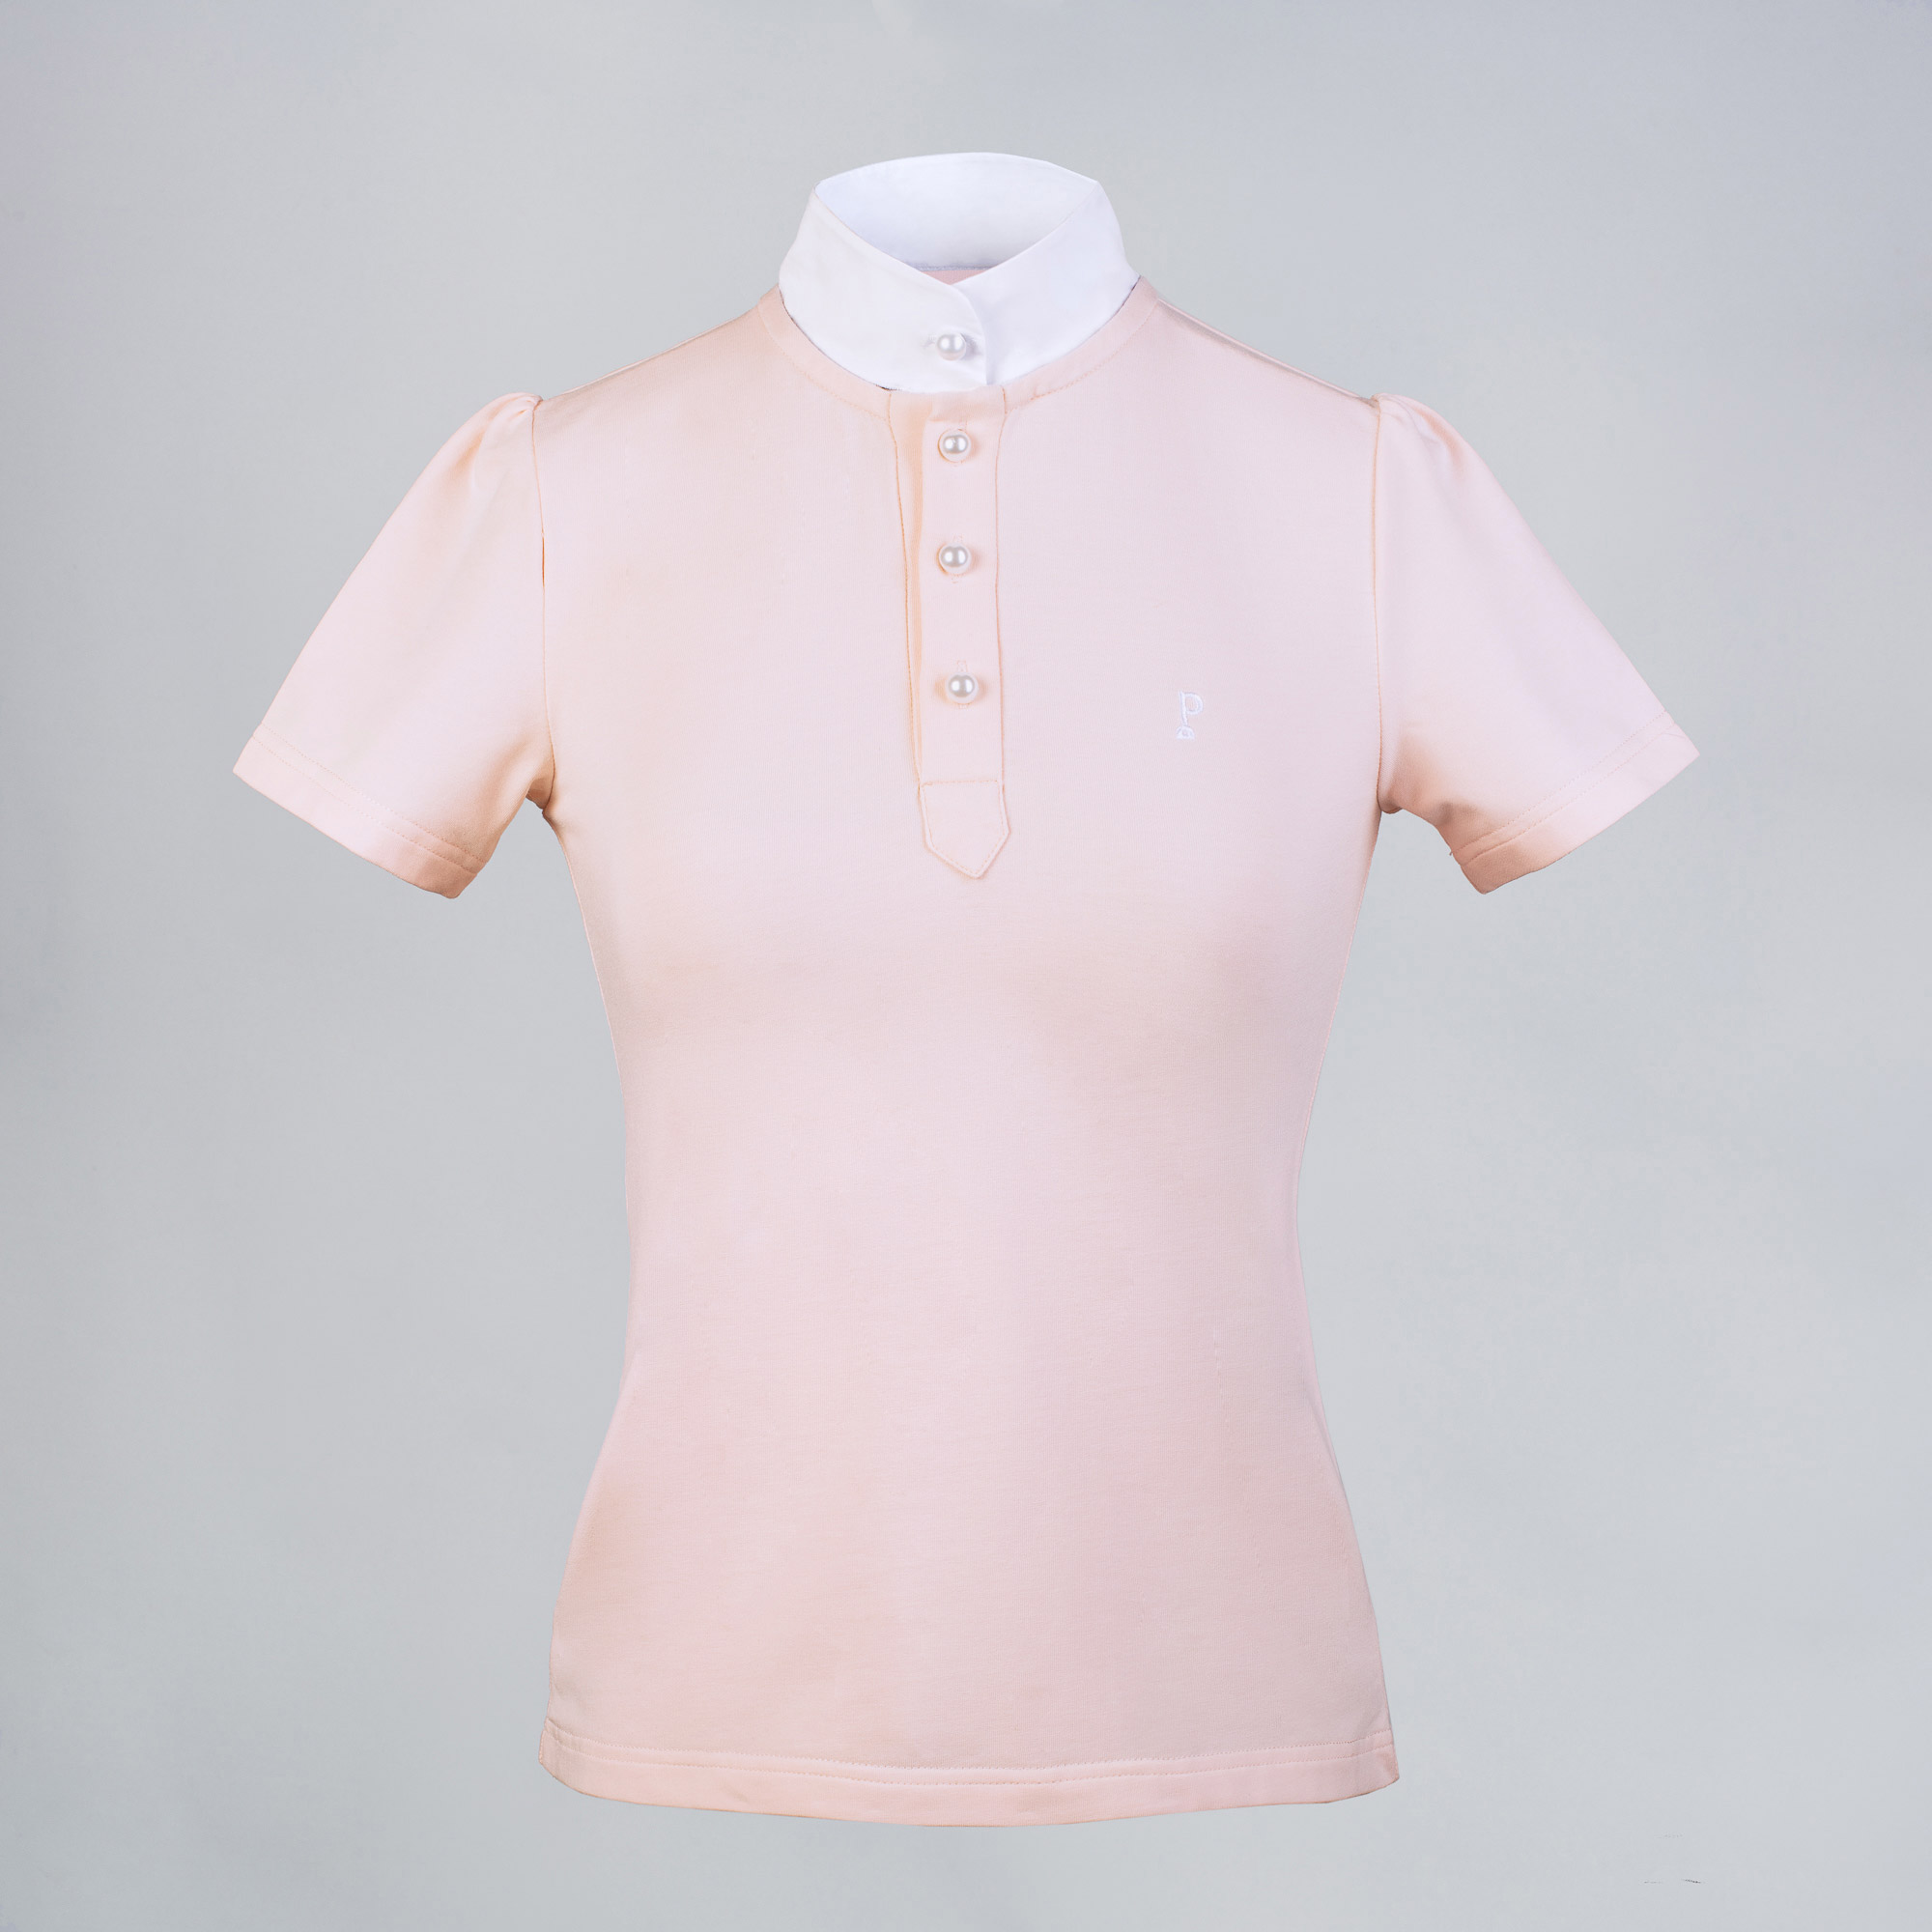 triple - pink riding polo shirt for girls - iconic triple model